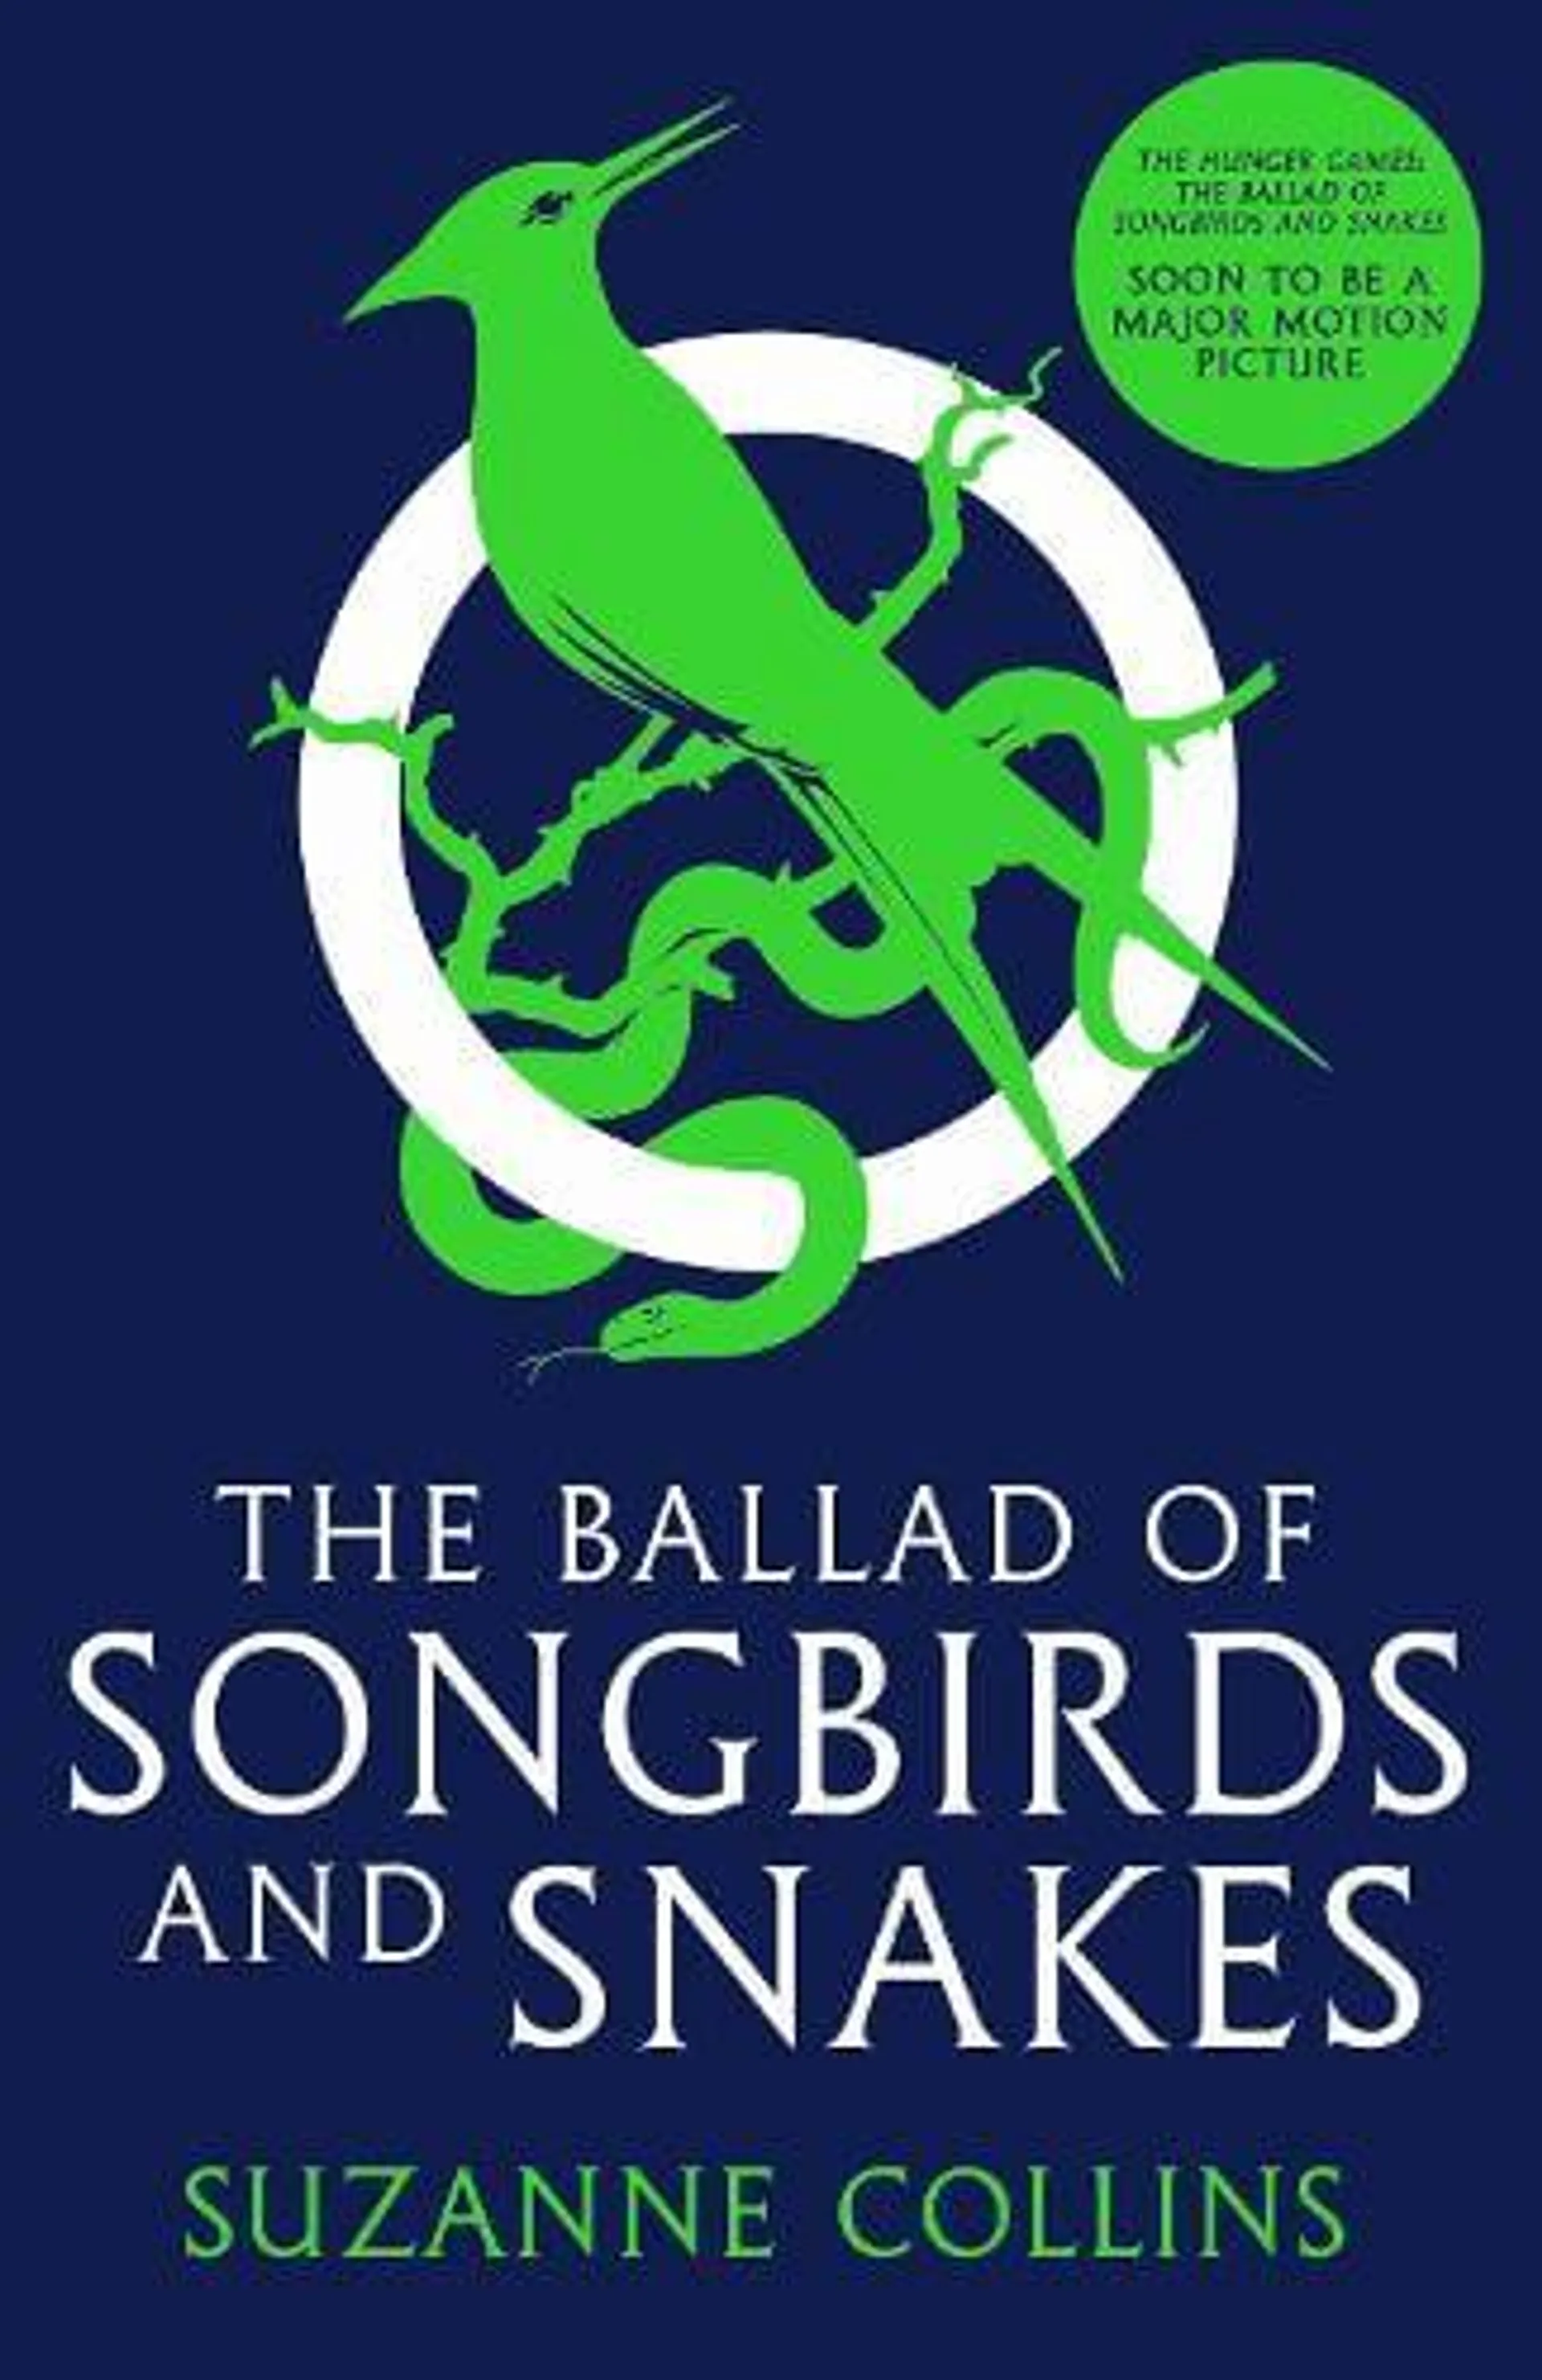 The Ballad of Songbirds and Snakes (A Hunger Games Novel) - The Hunger Games (Paperback)